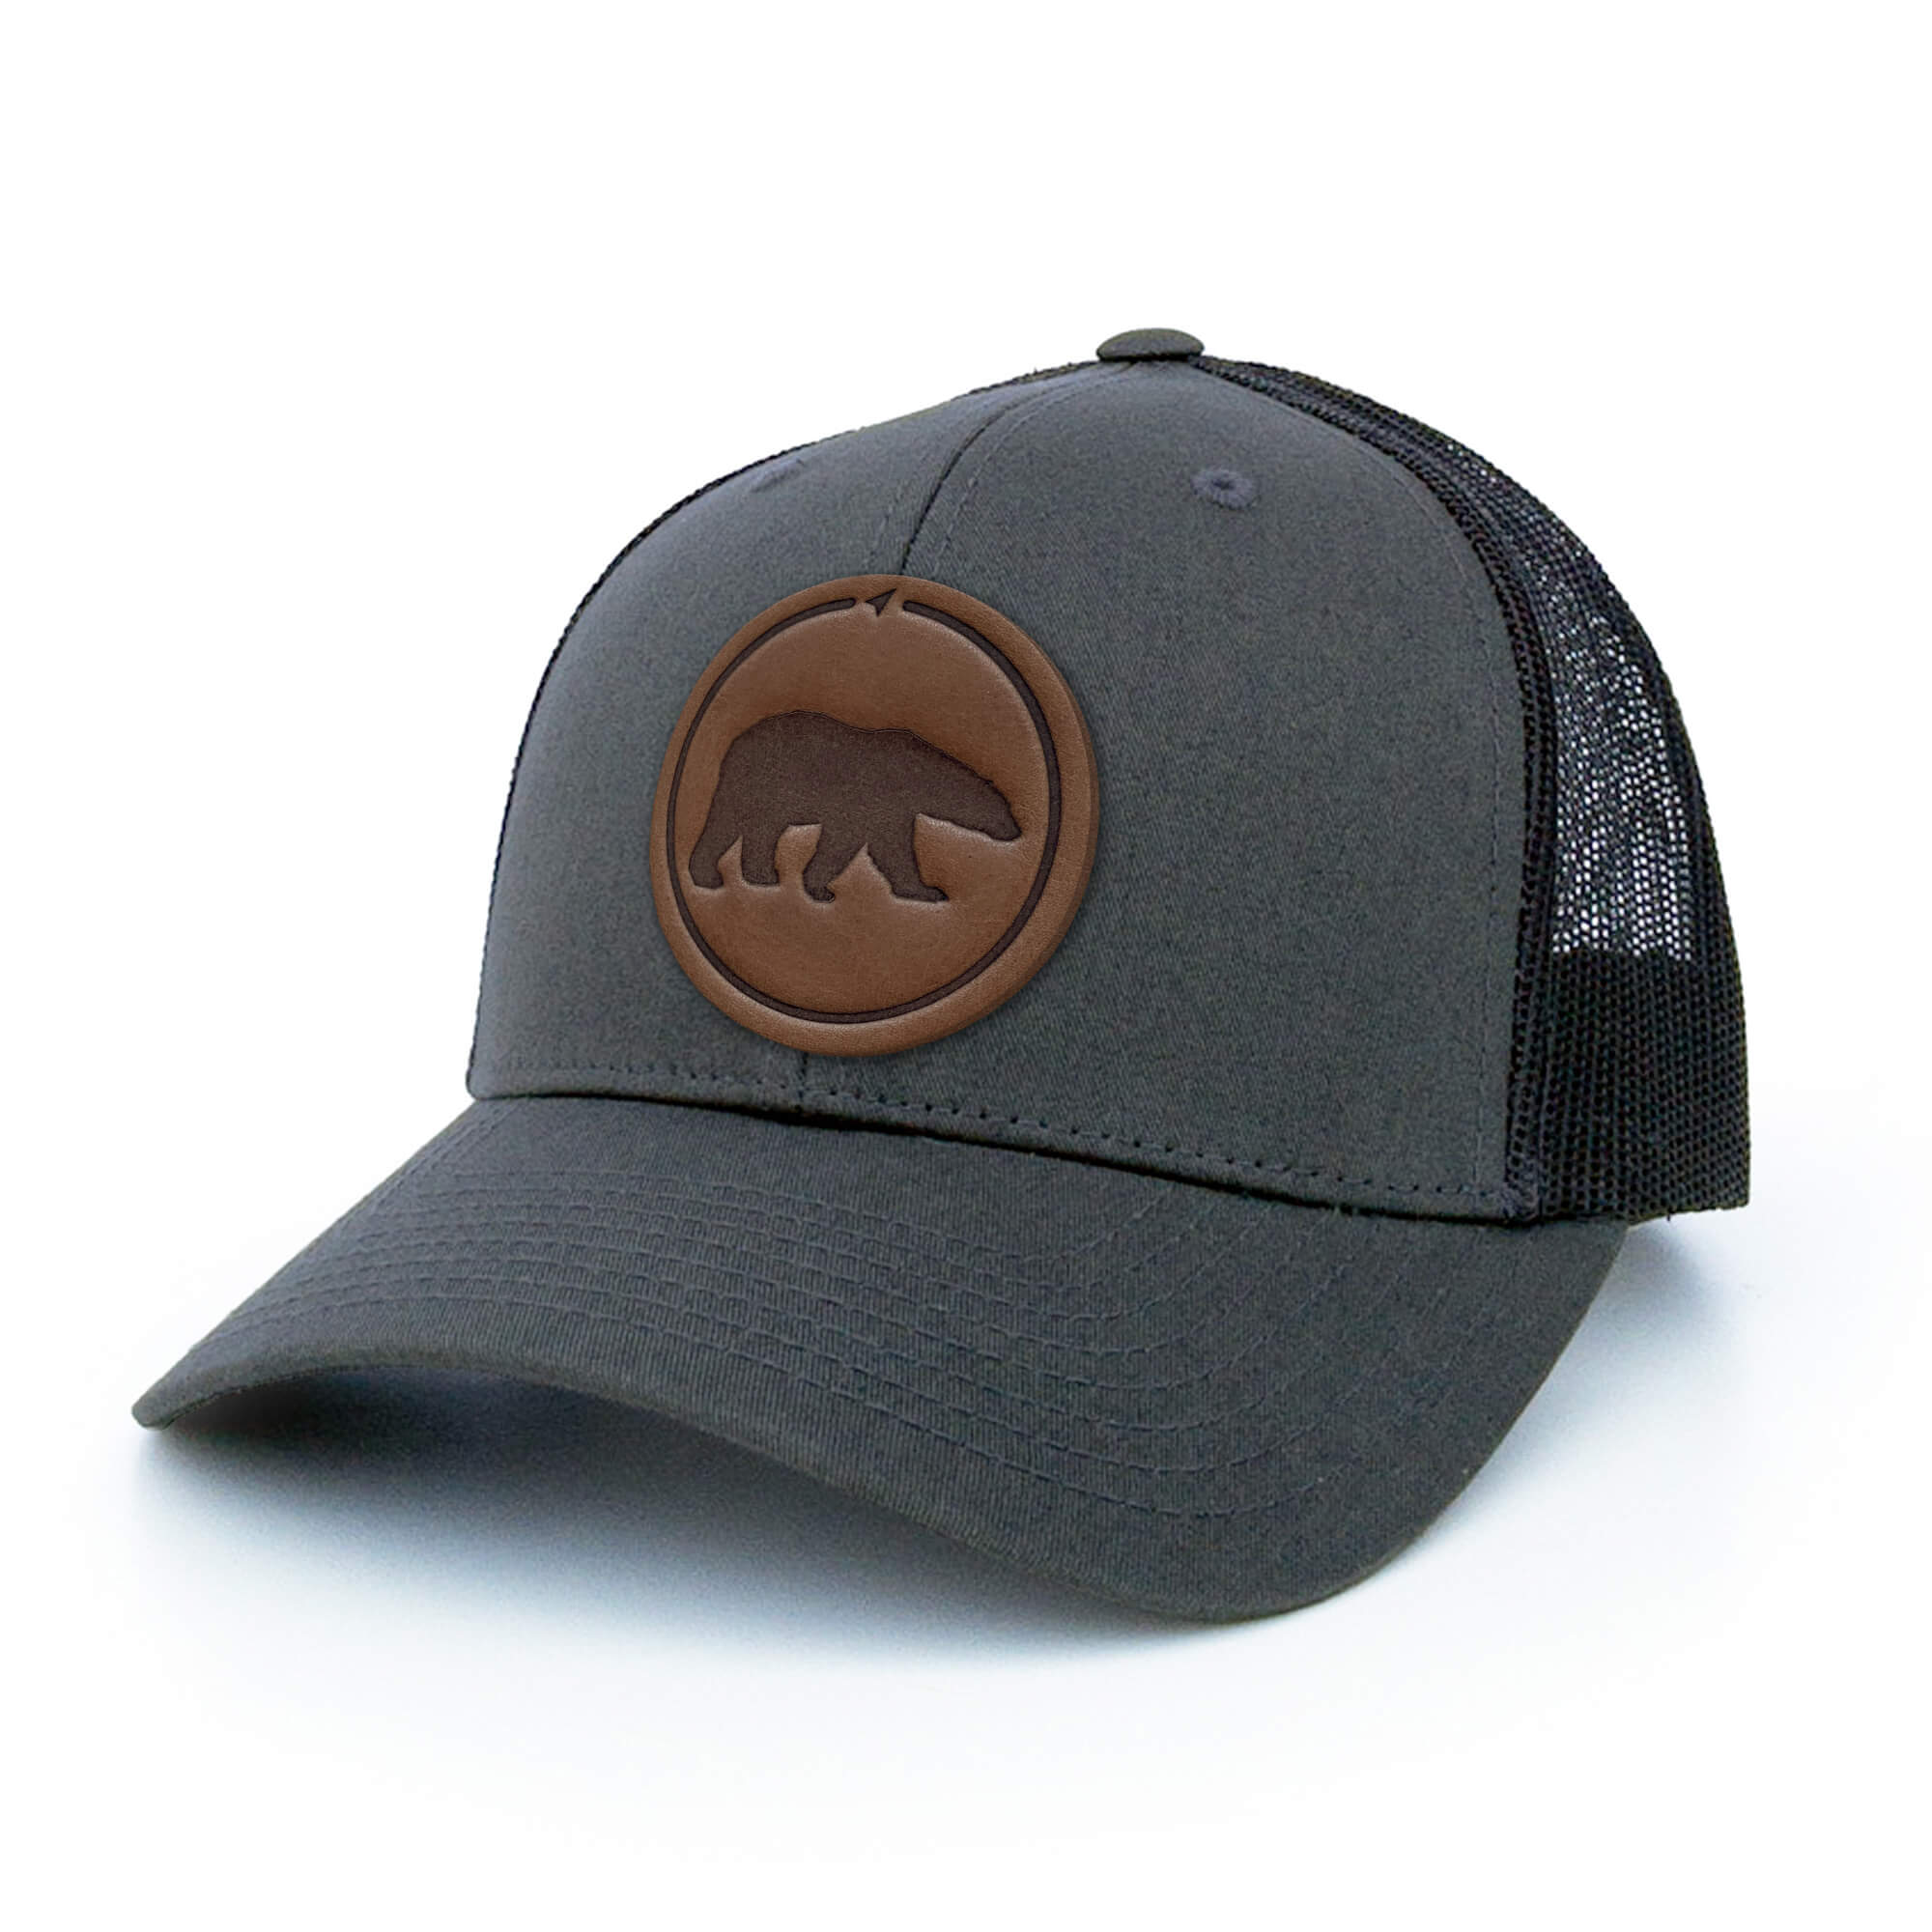 Charcoal trucker hat with full-grain leather patch of a Polar Bear | BLACK-004-003, CHARC-004-003, NAVY-004-003, HGREY-004-003, MOSS-004-003, BROWN-004-003